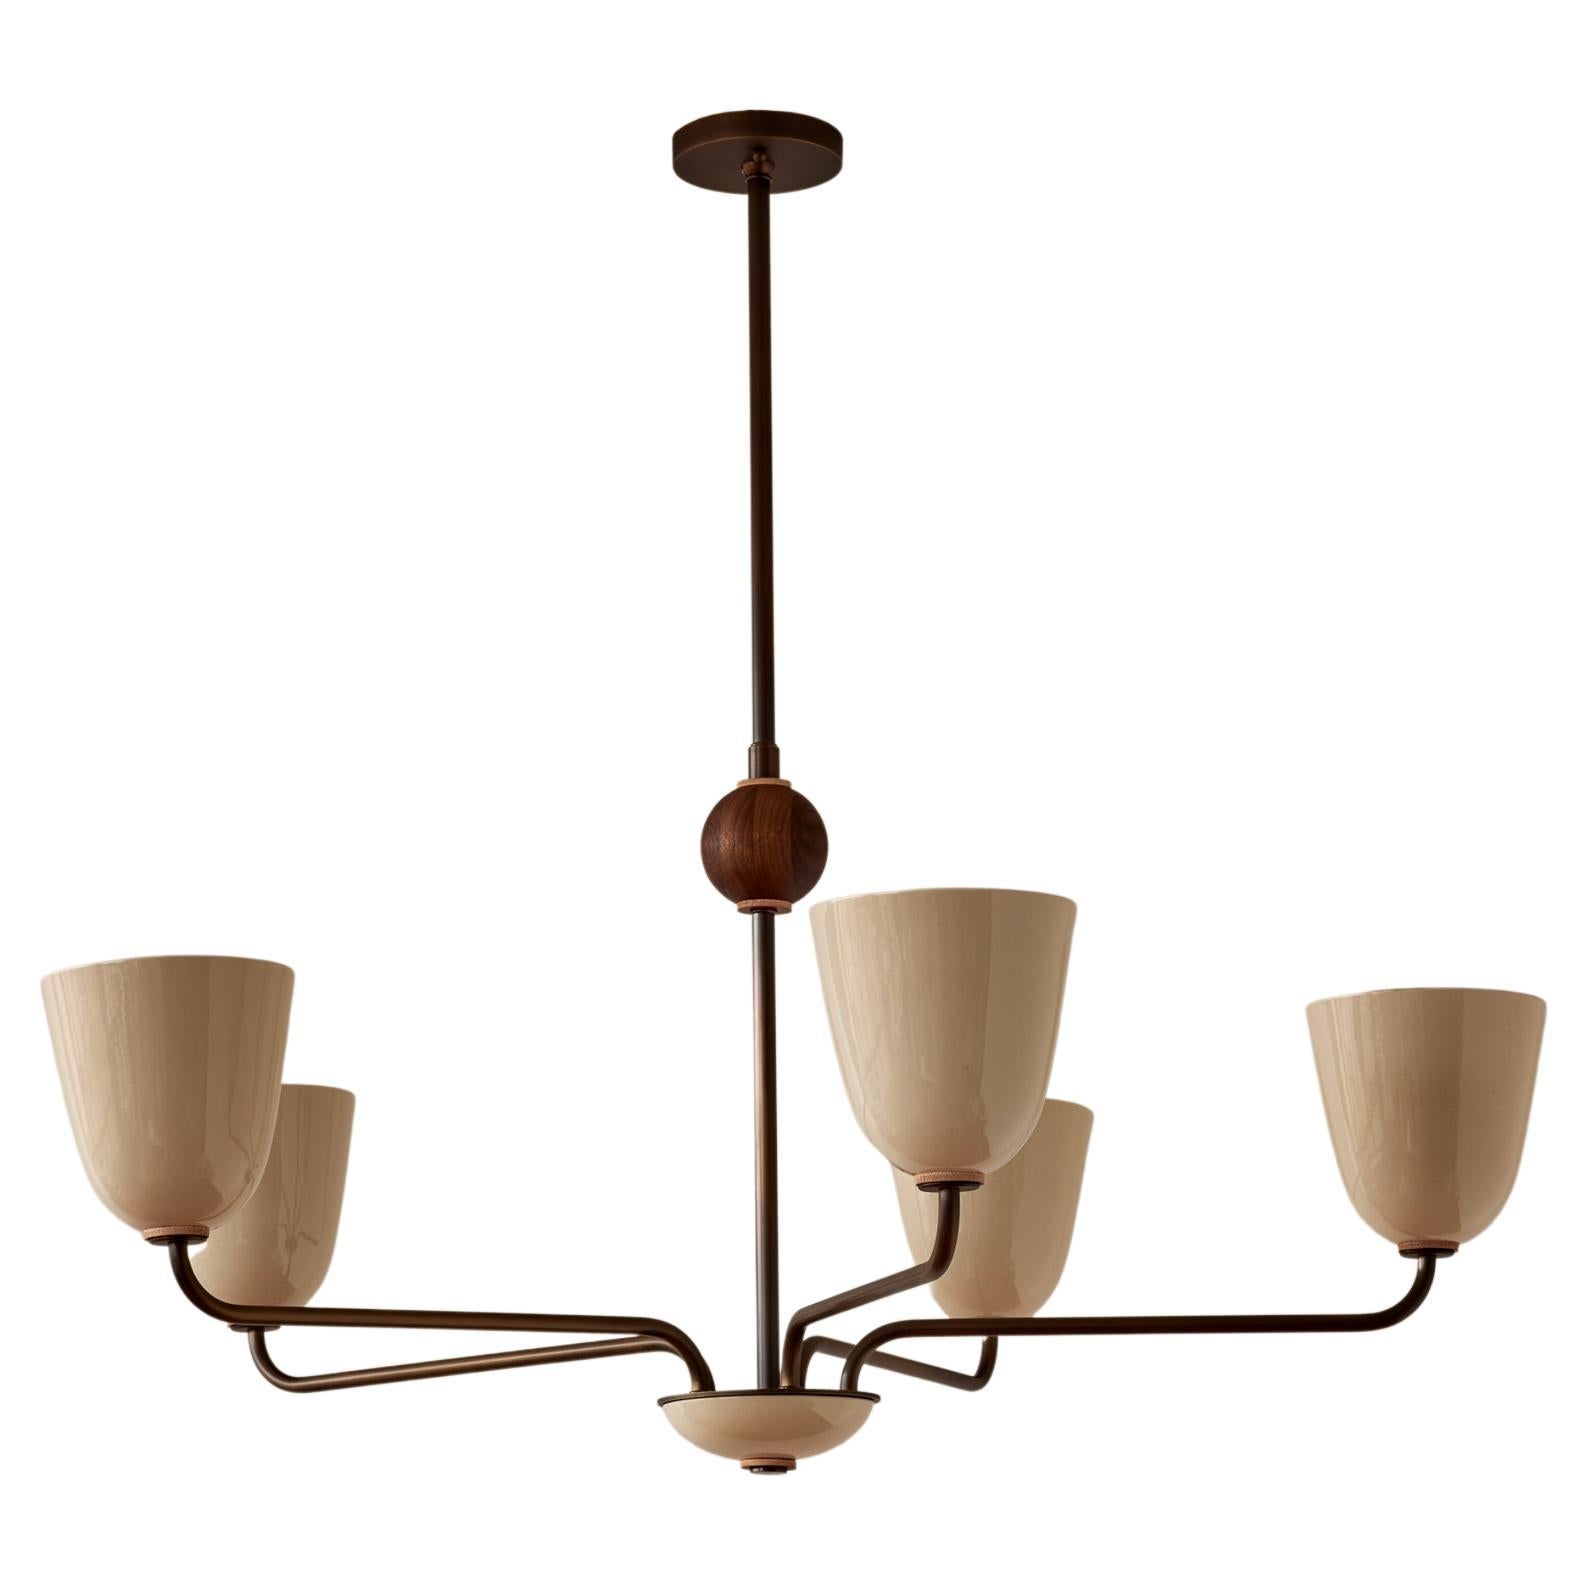 Glossy Cream Ceramic Chandelier in Antique Brass 5-Arm 42.5" DIA For Sale